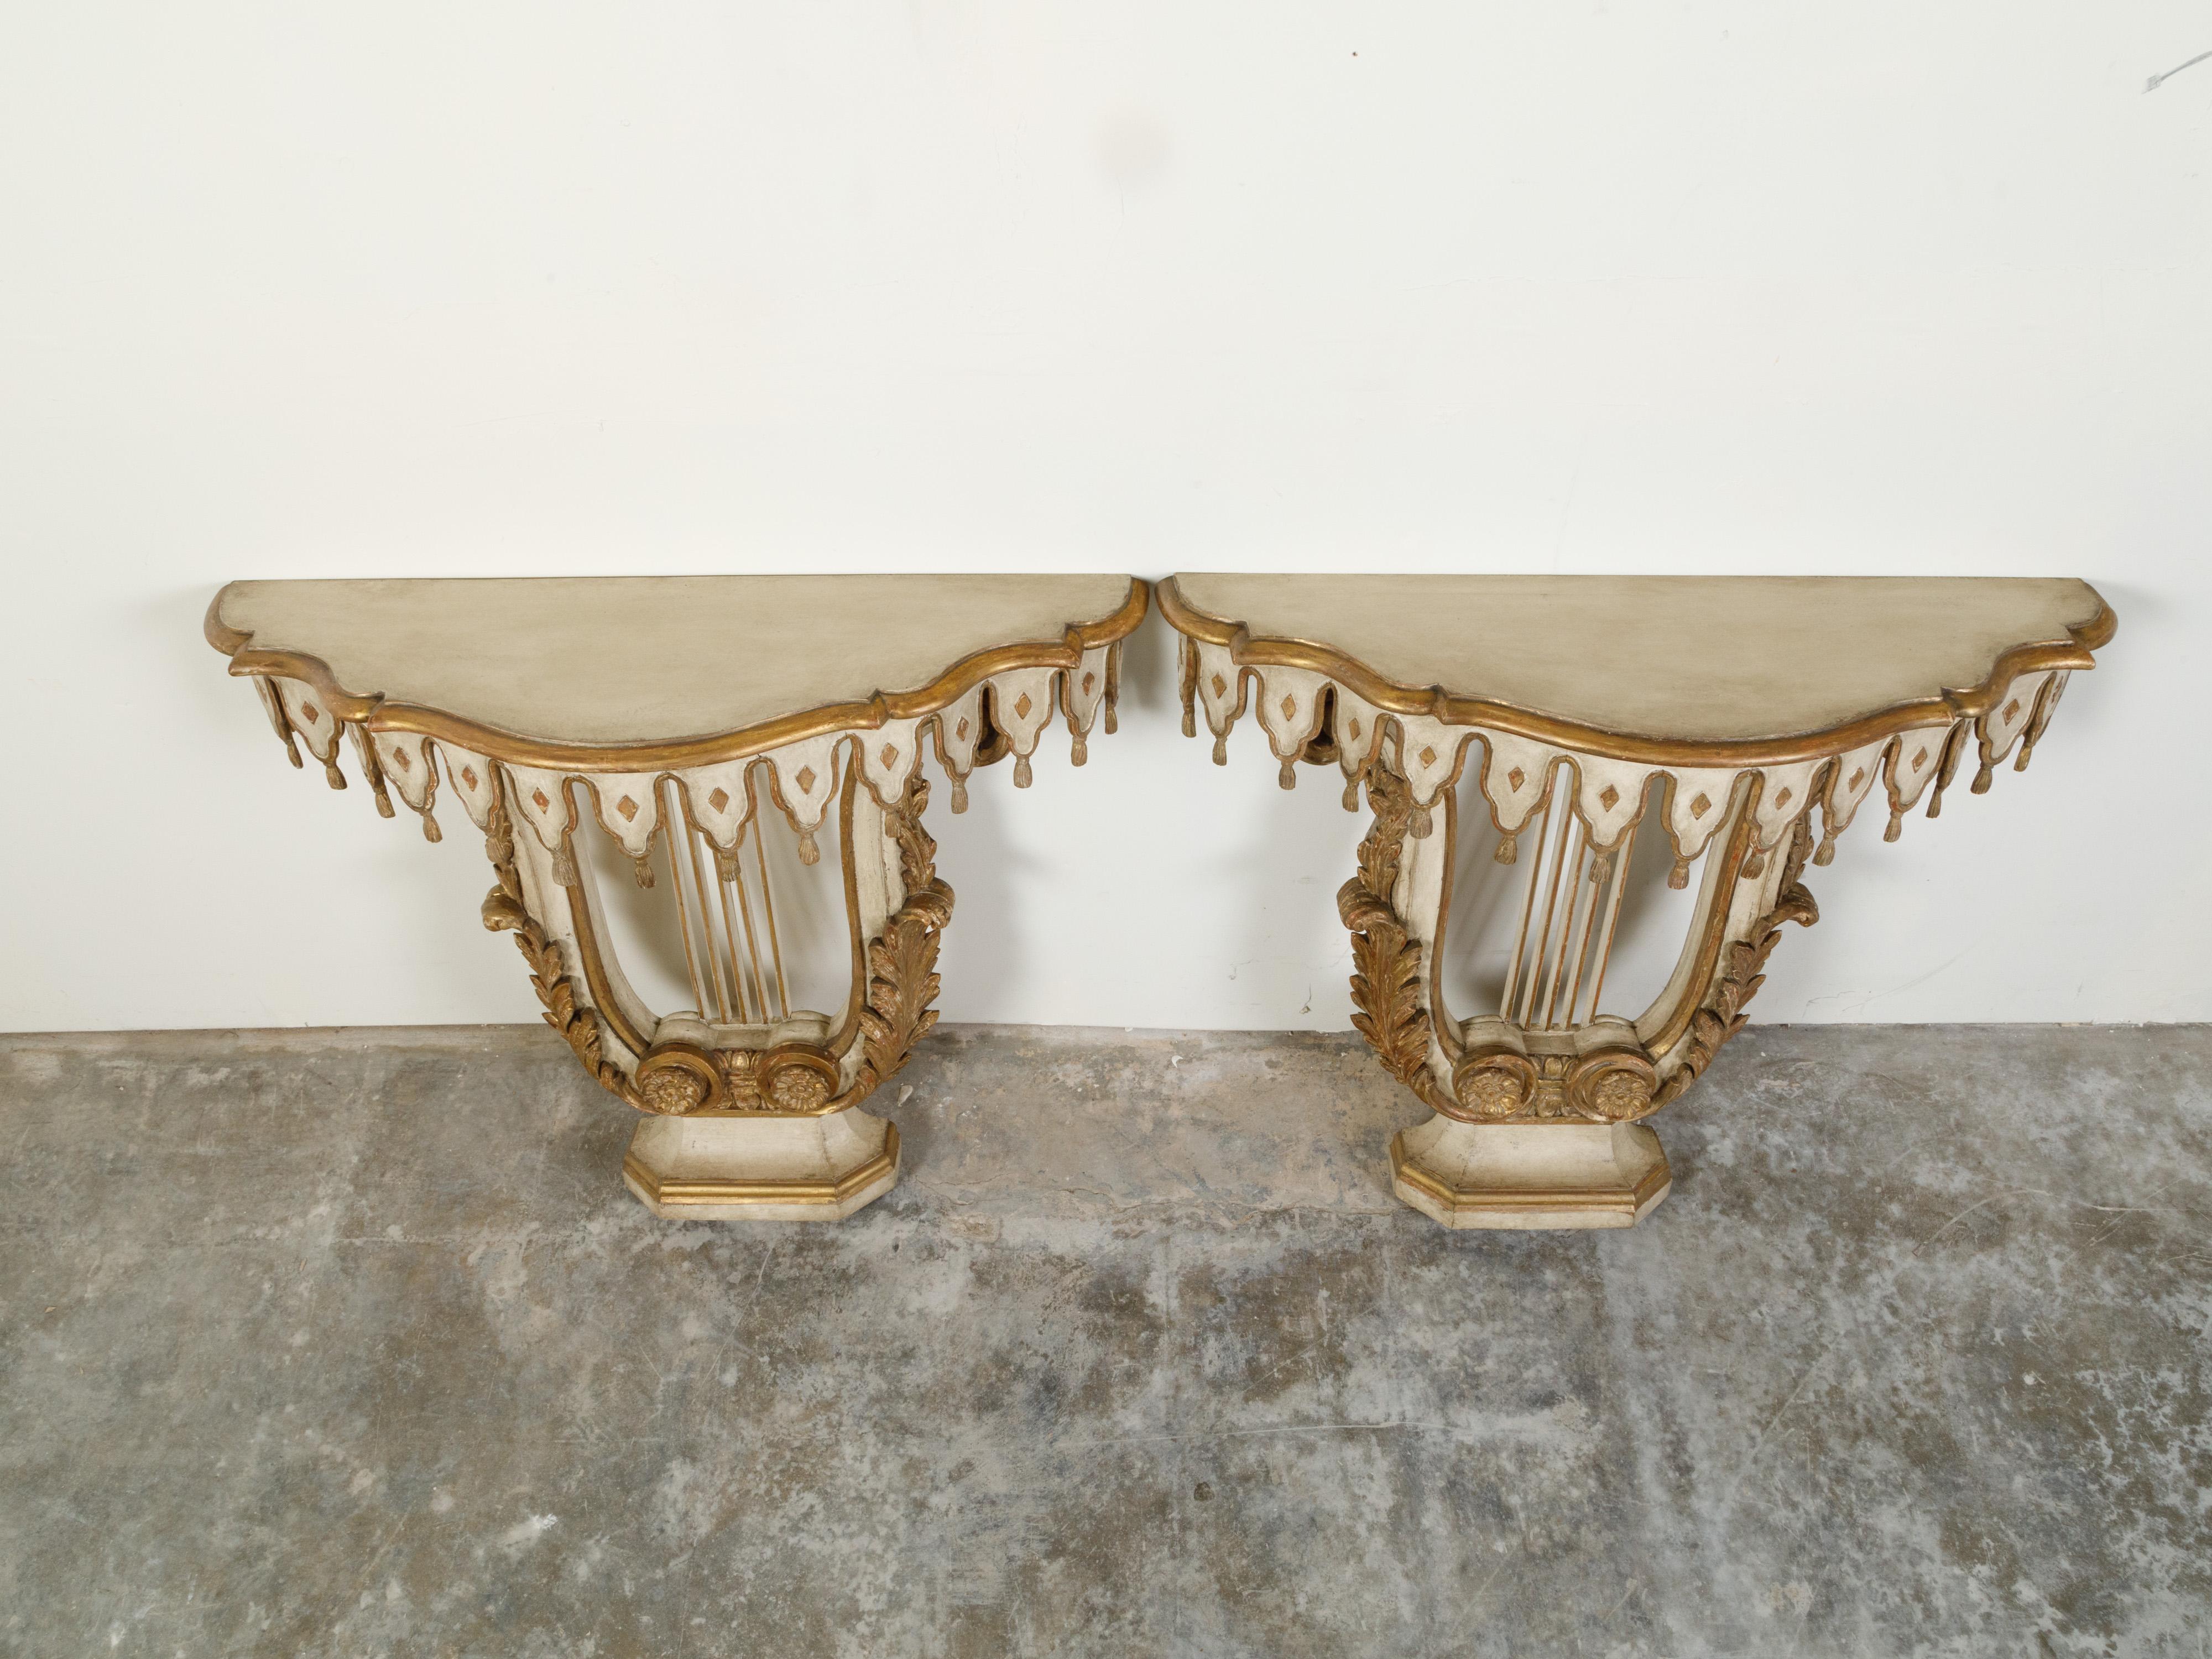 A pair of Italian painted and gilded demilune console tables from the early 20th century, with tassel motifs and lyre-shaped bases. Created in Italy during the first quarter of the 20th century, these demilunes attract our attention with their